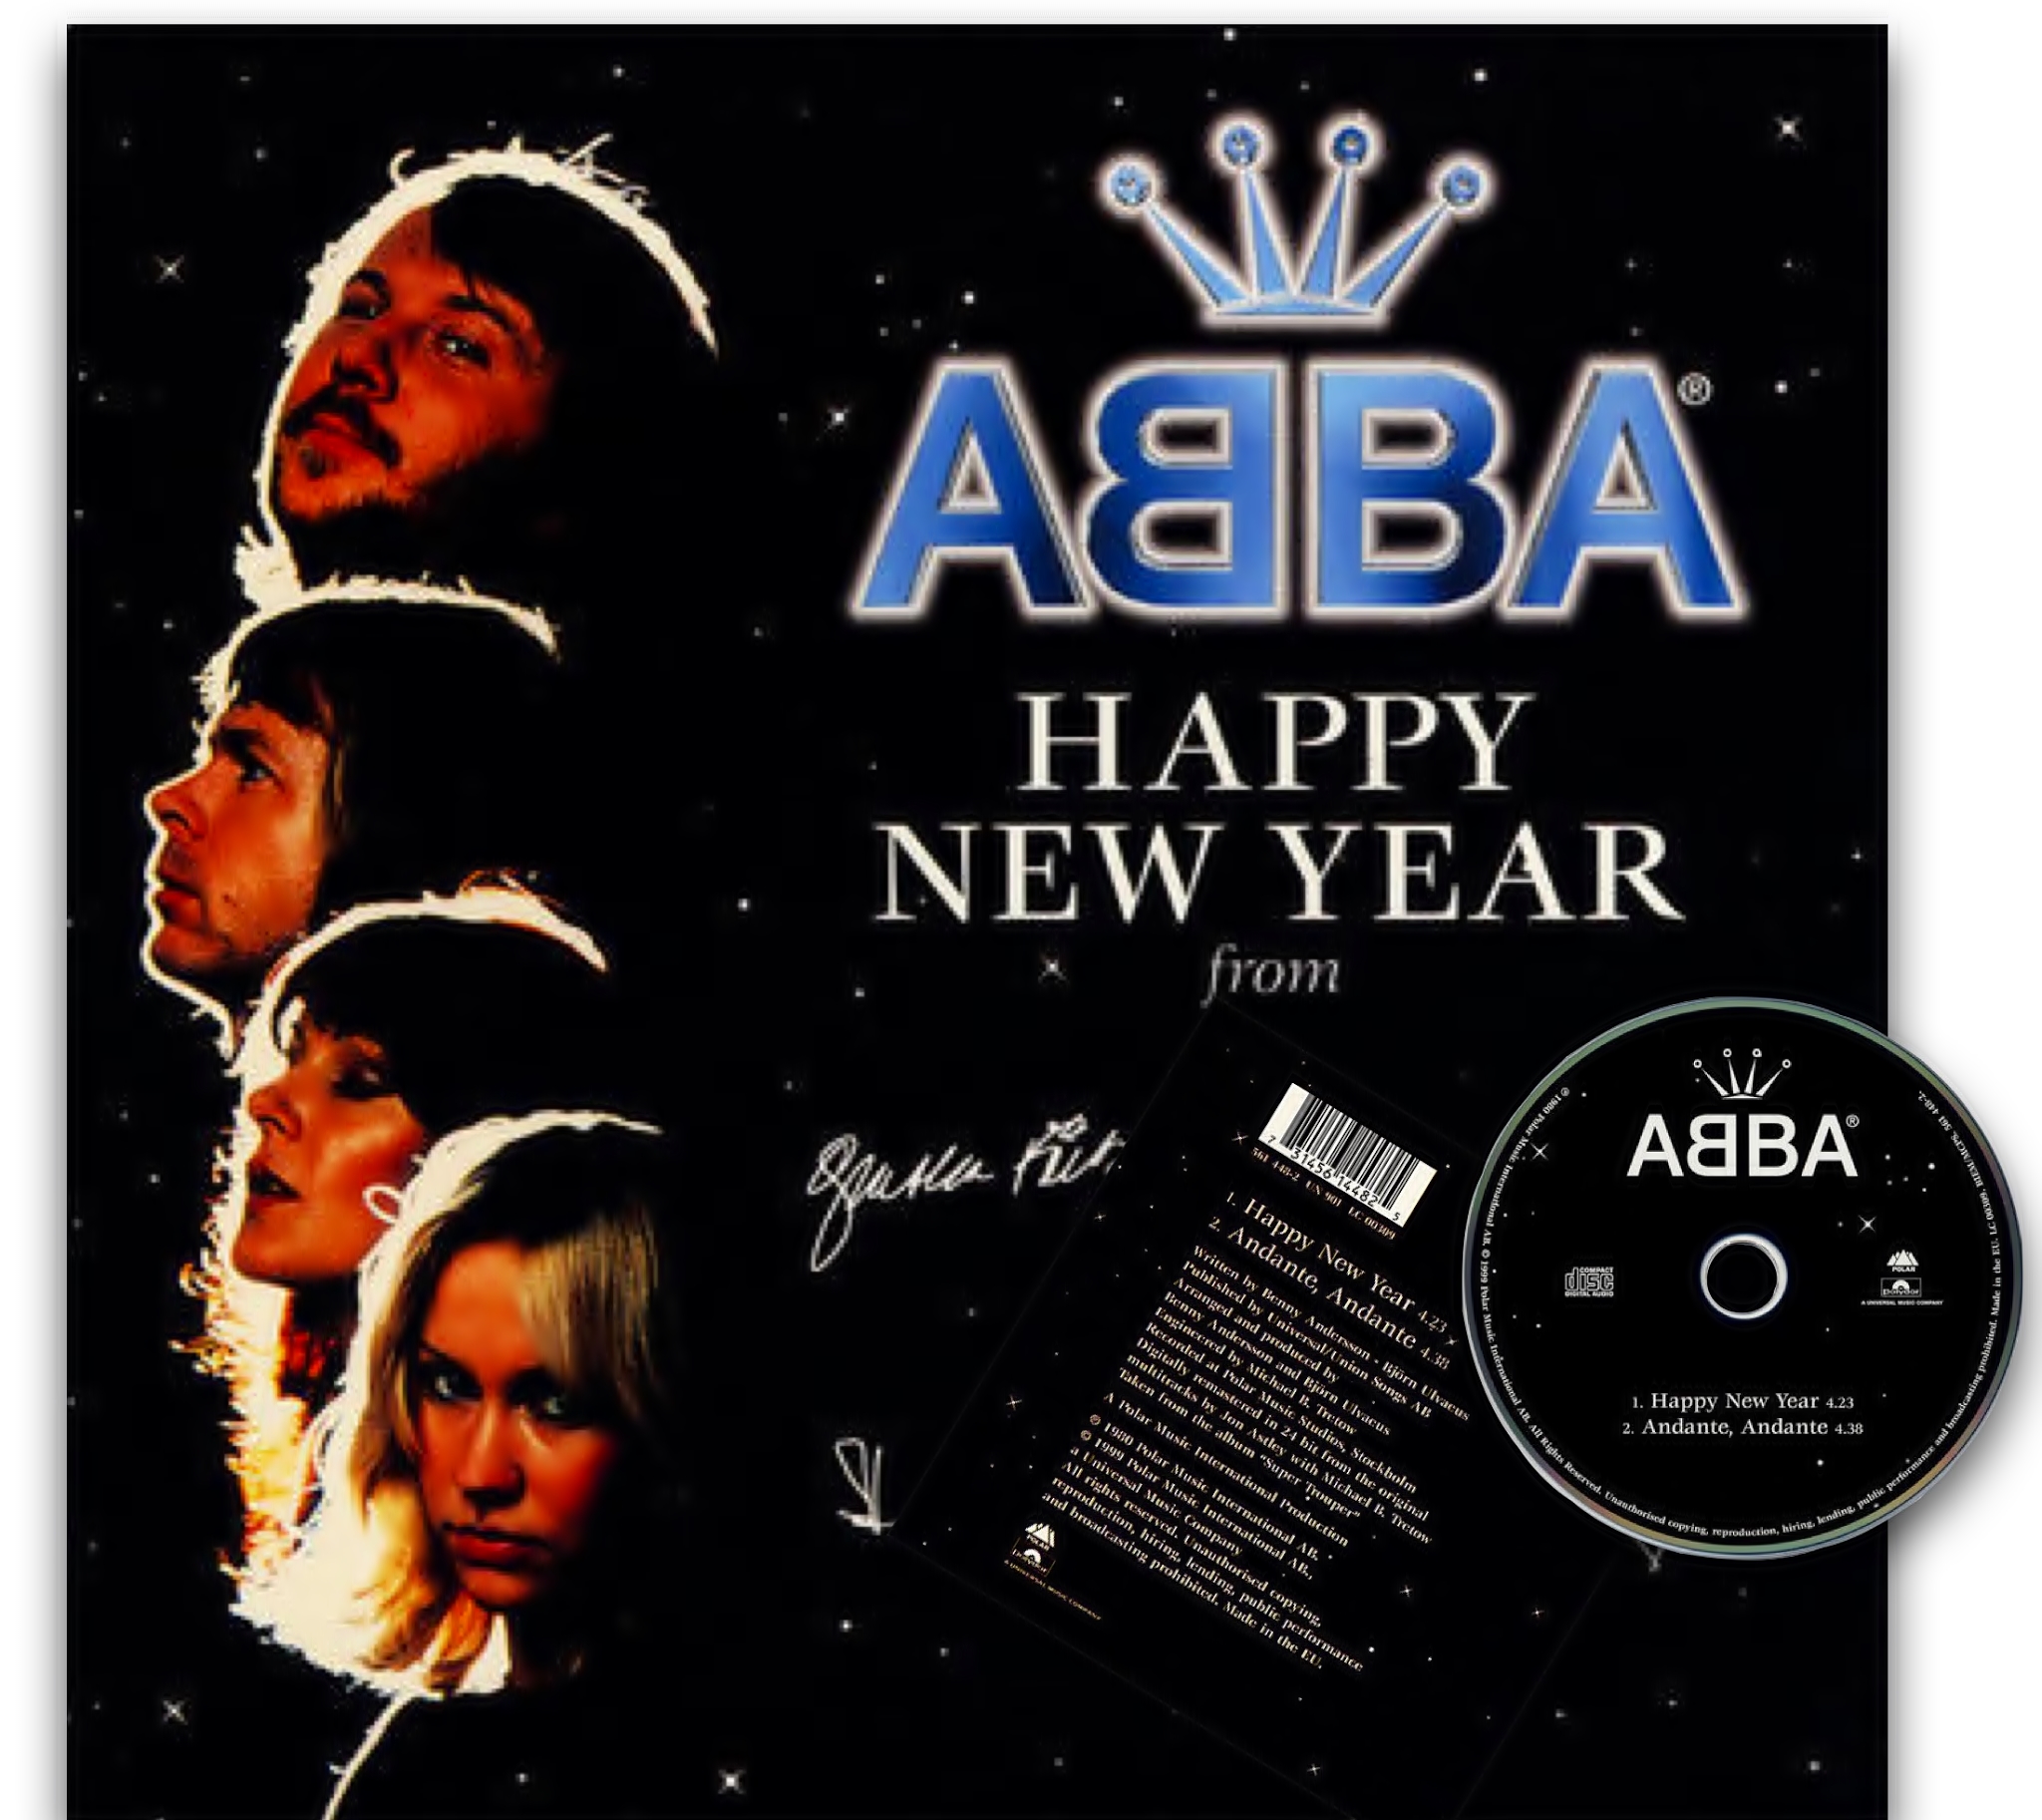 New year's song. ABBA Happy New year обложка. ABBA новый год. Happy New year ABBA текст. ABBA Постер.